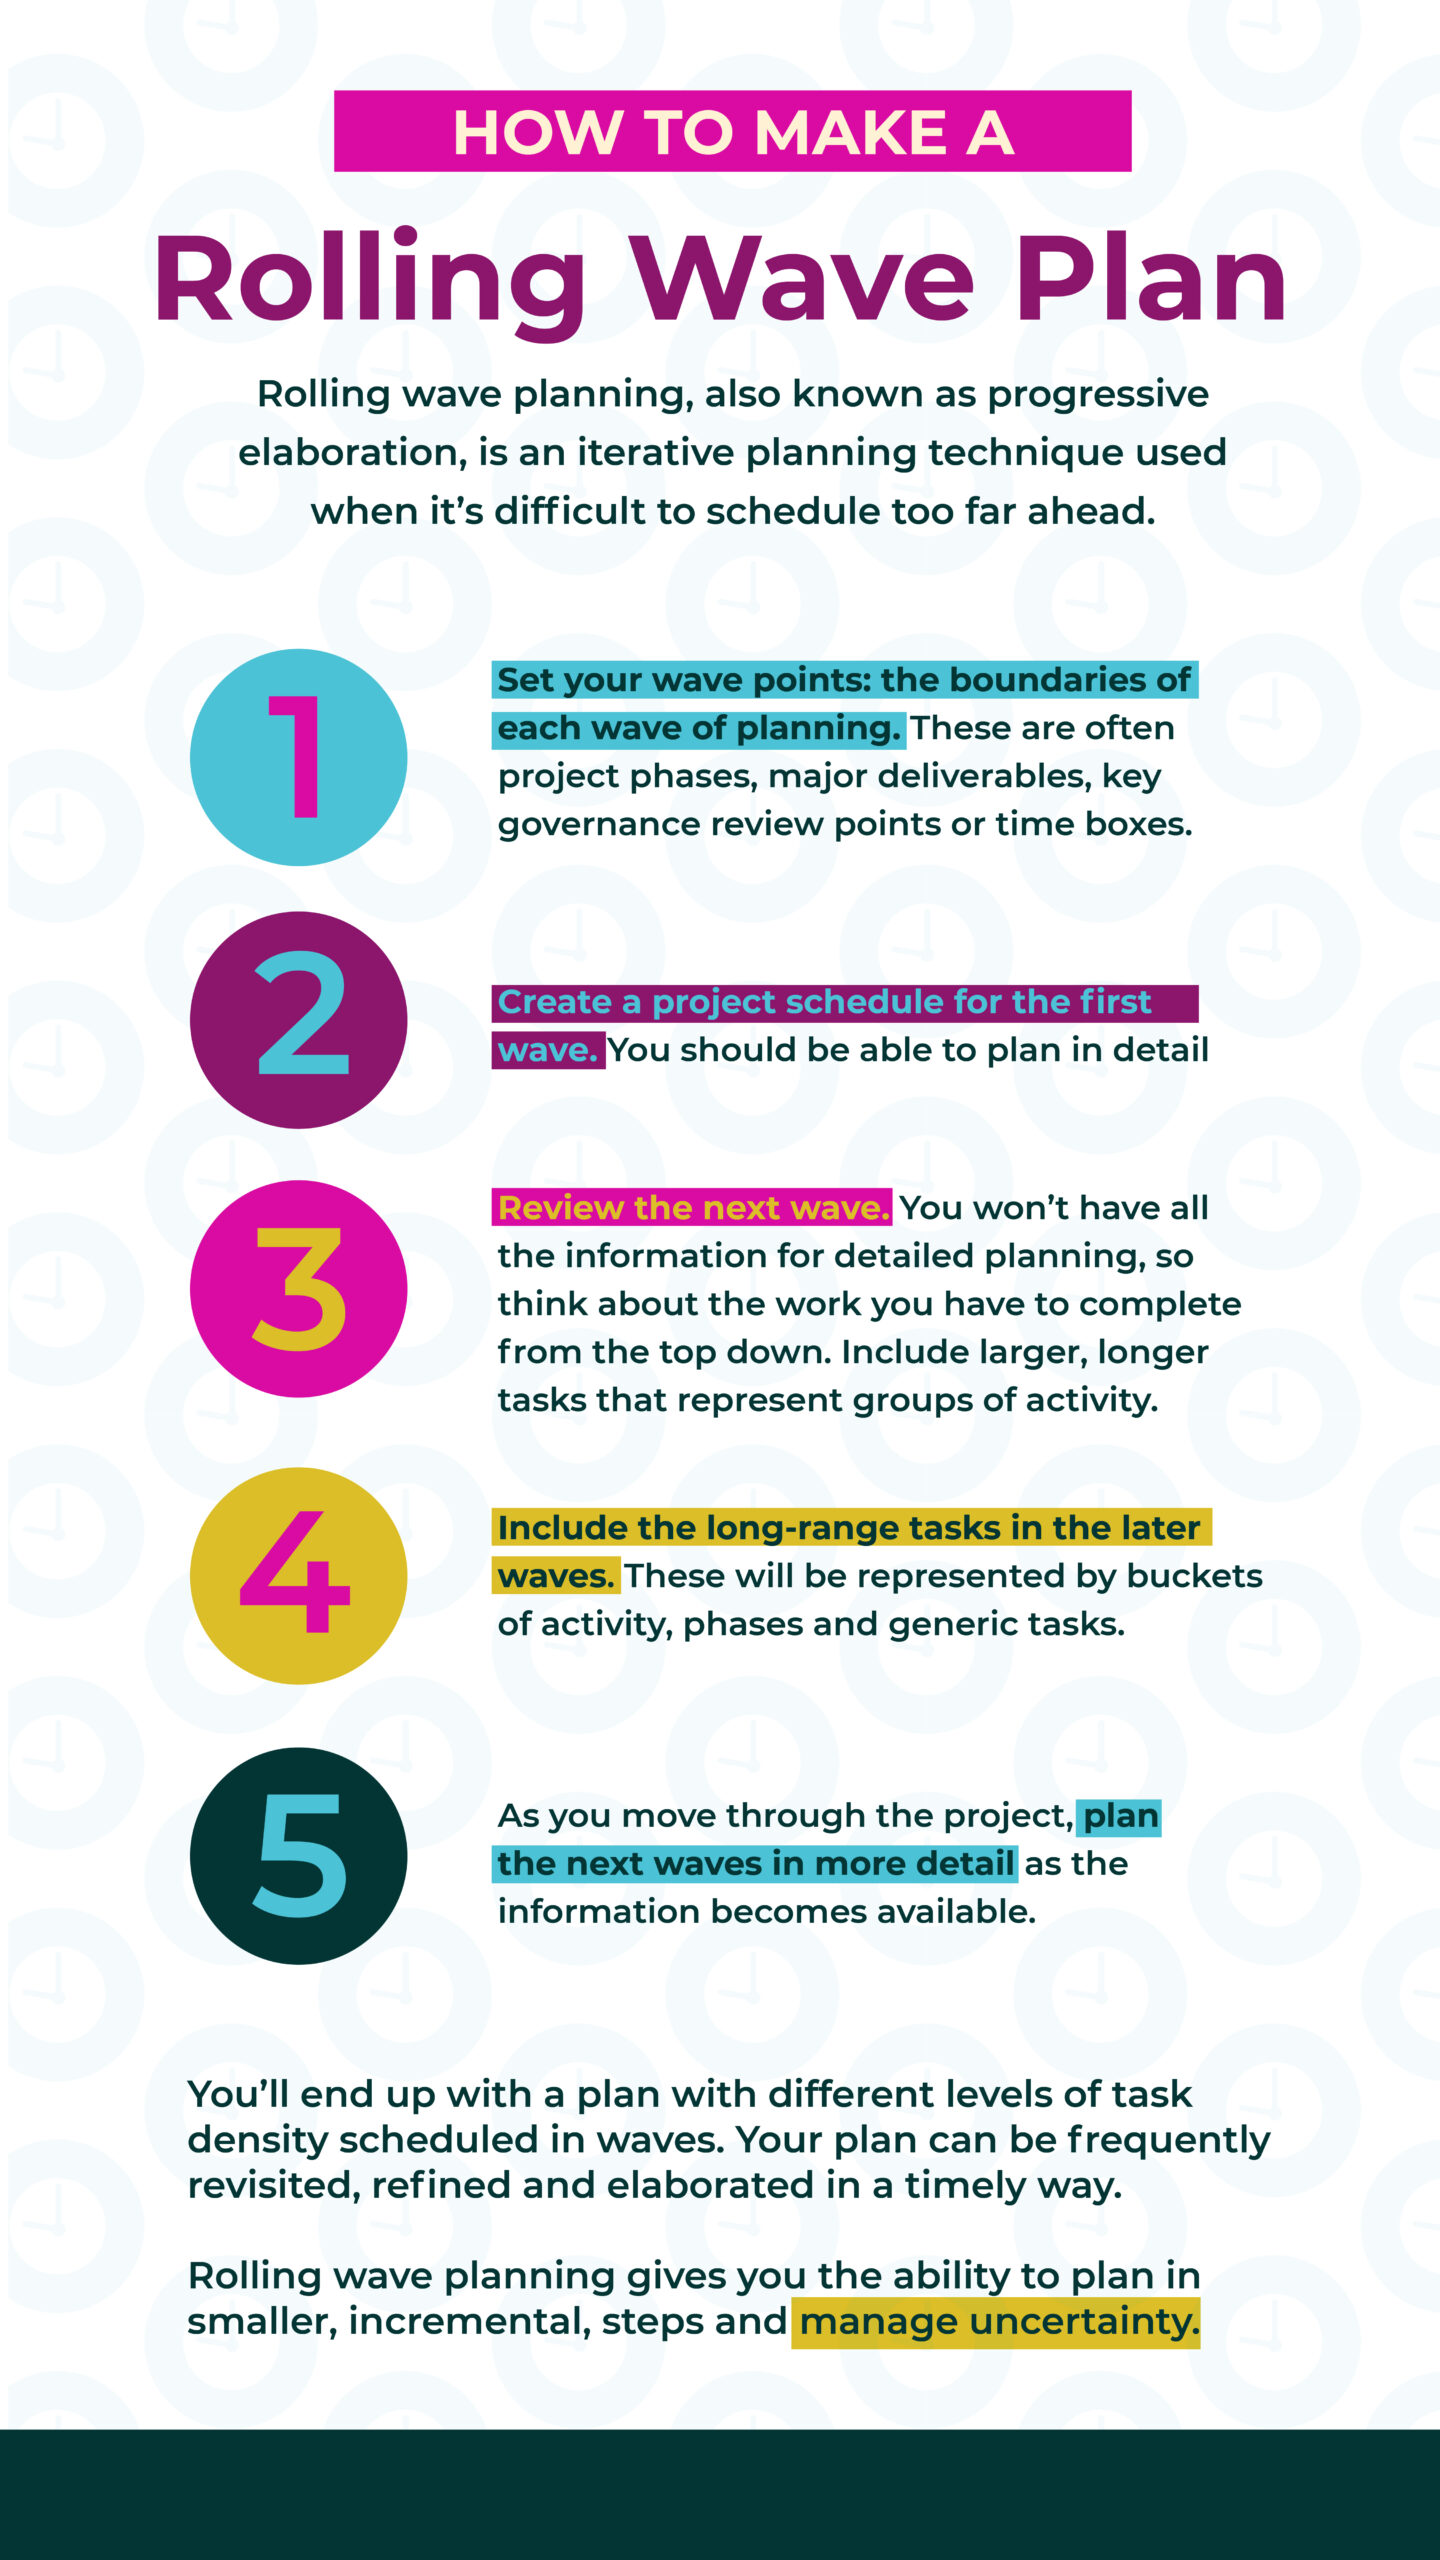 Infographic on steps to make a rolling wave plan drawn from the article